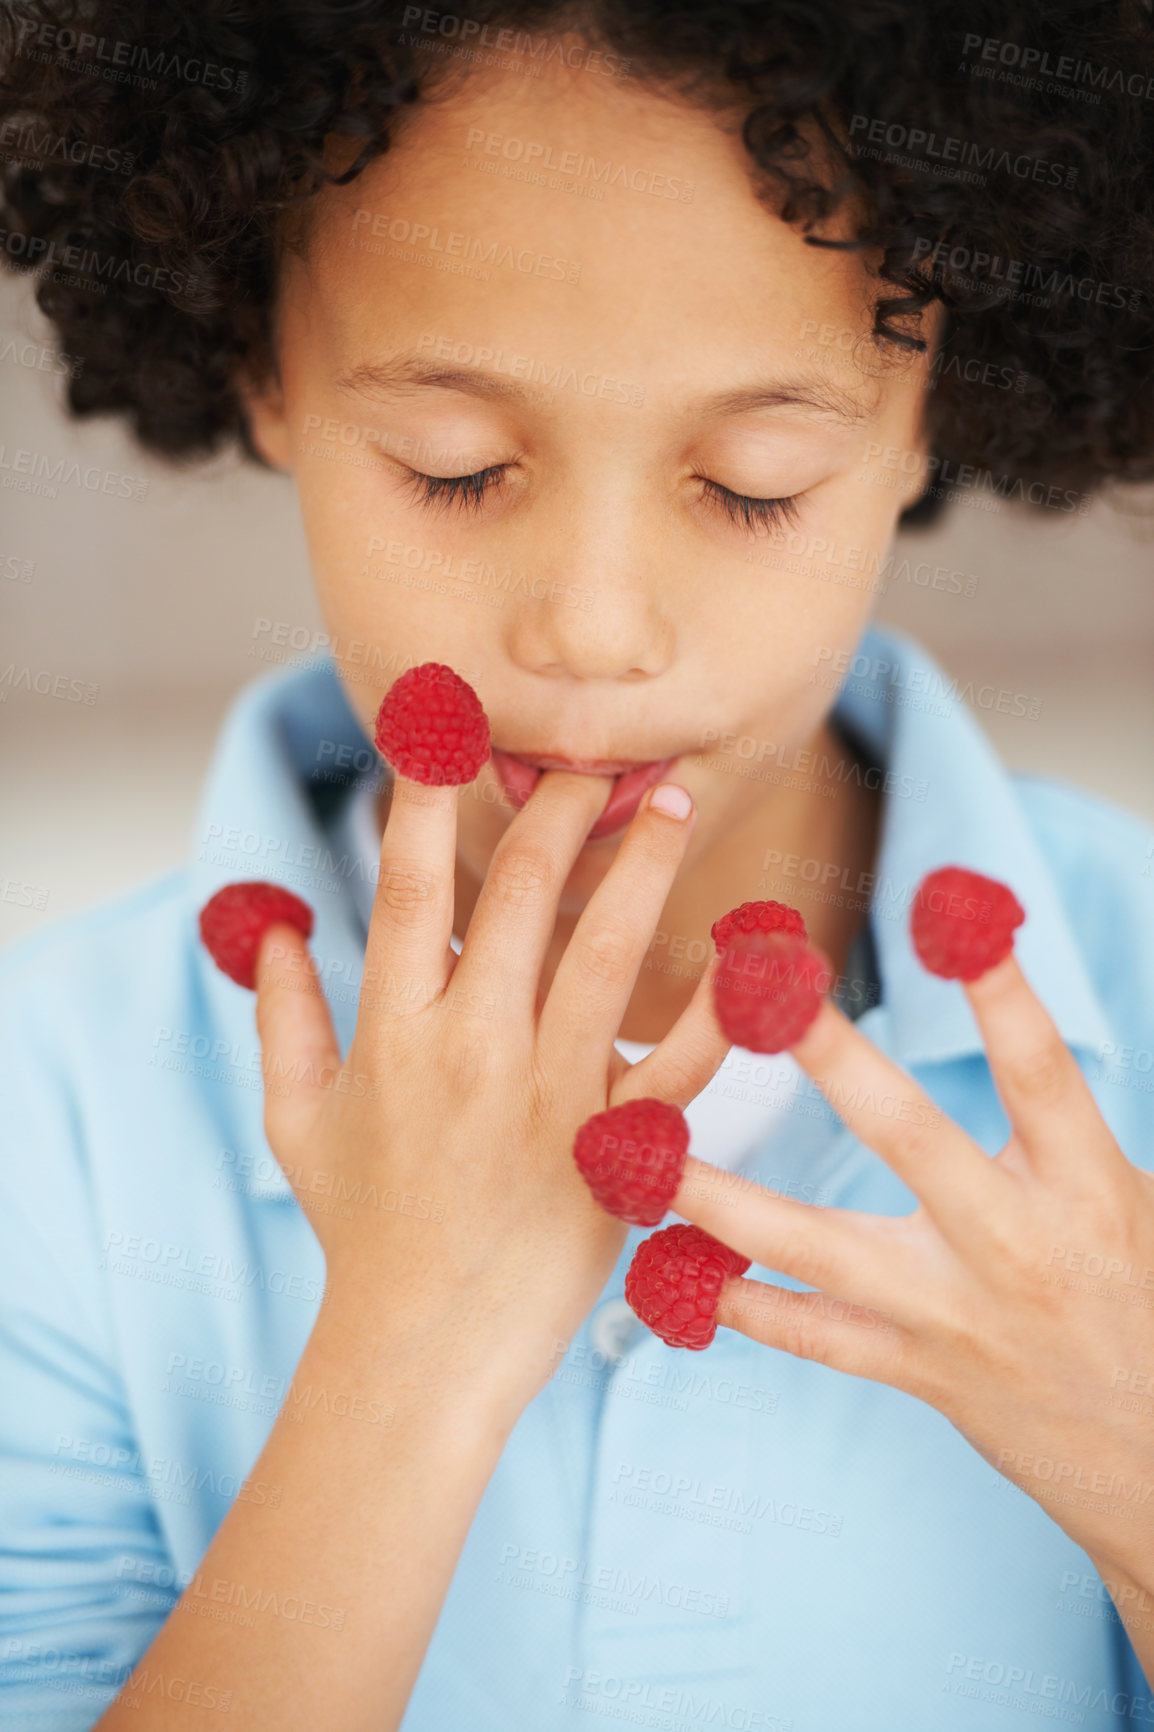 Buy stock photo A cute young boy eating raspberries off his fingers with his eyes closed